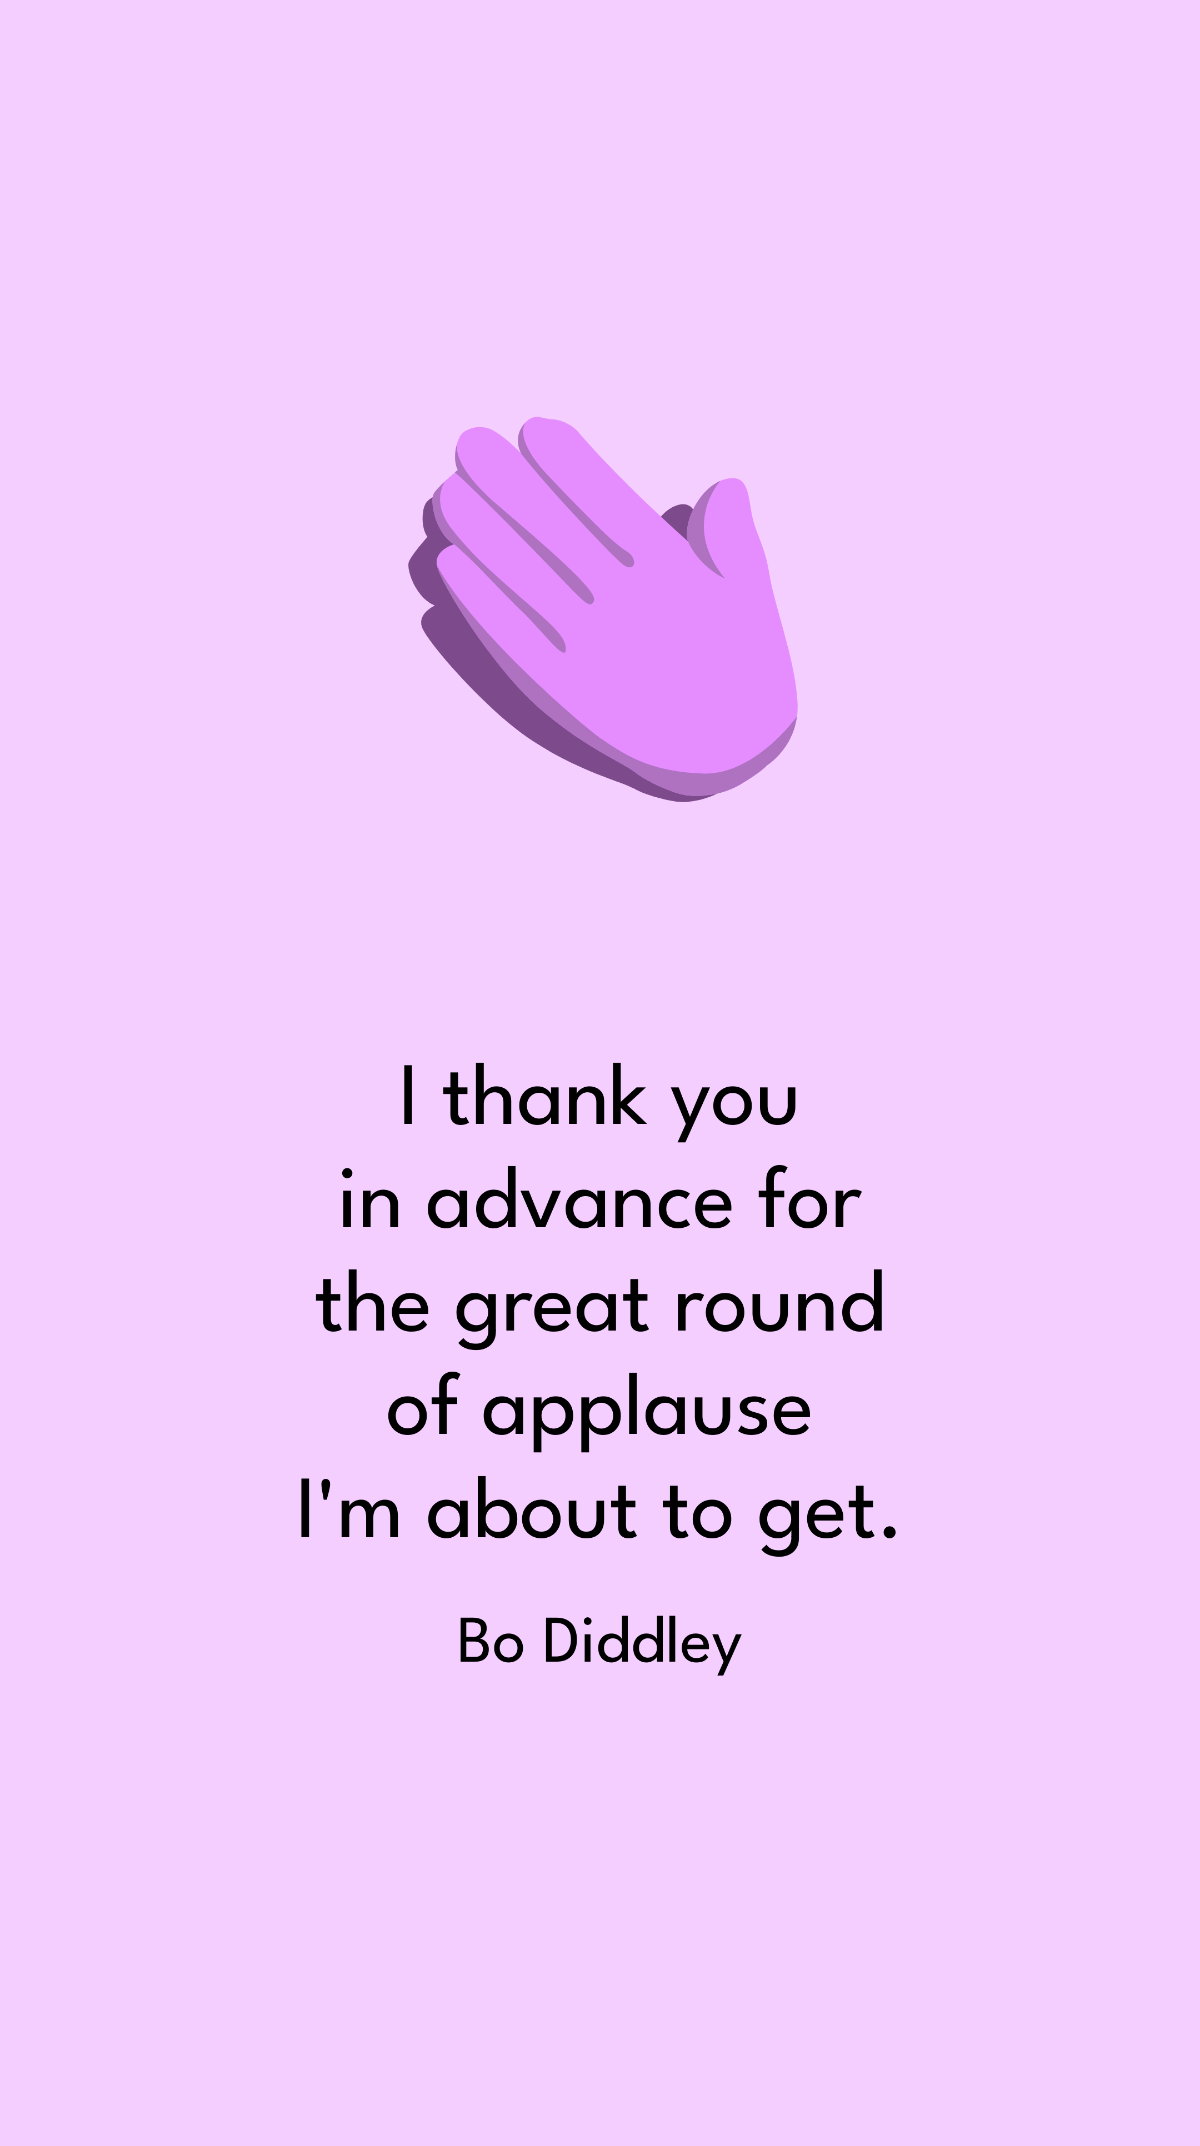 Bo Diddley - I thank you in advance for the great round of applause I'm about to get. Template